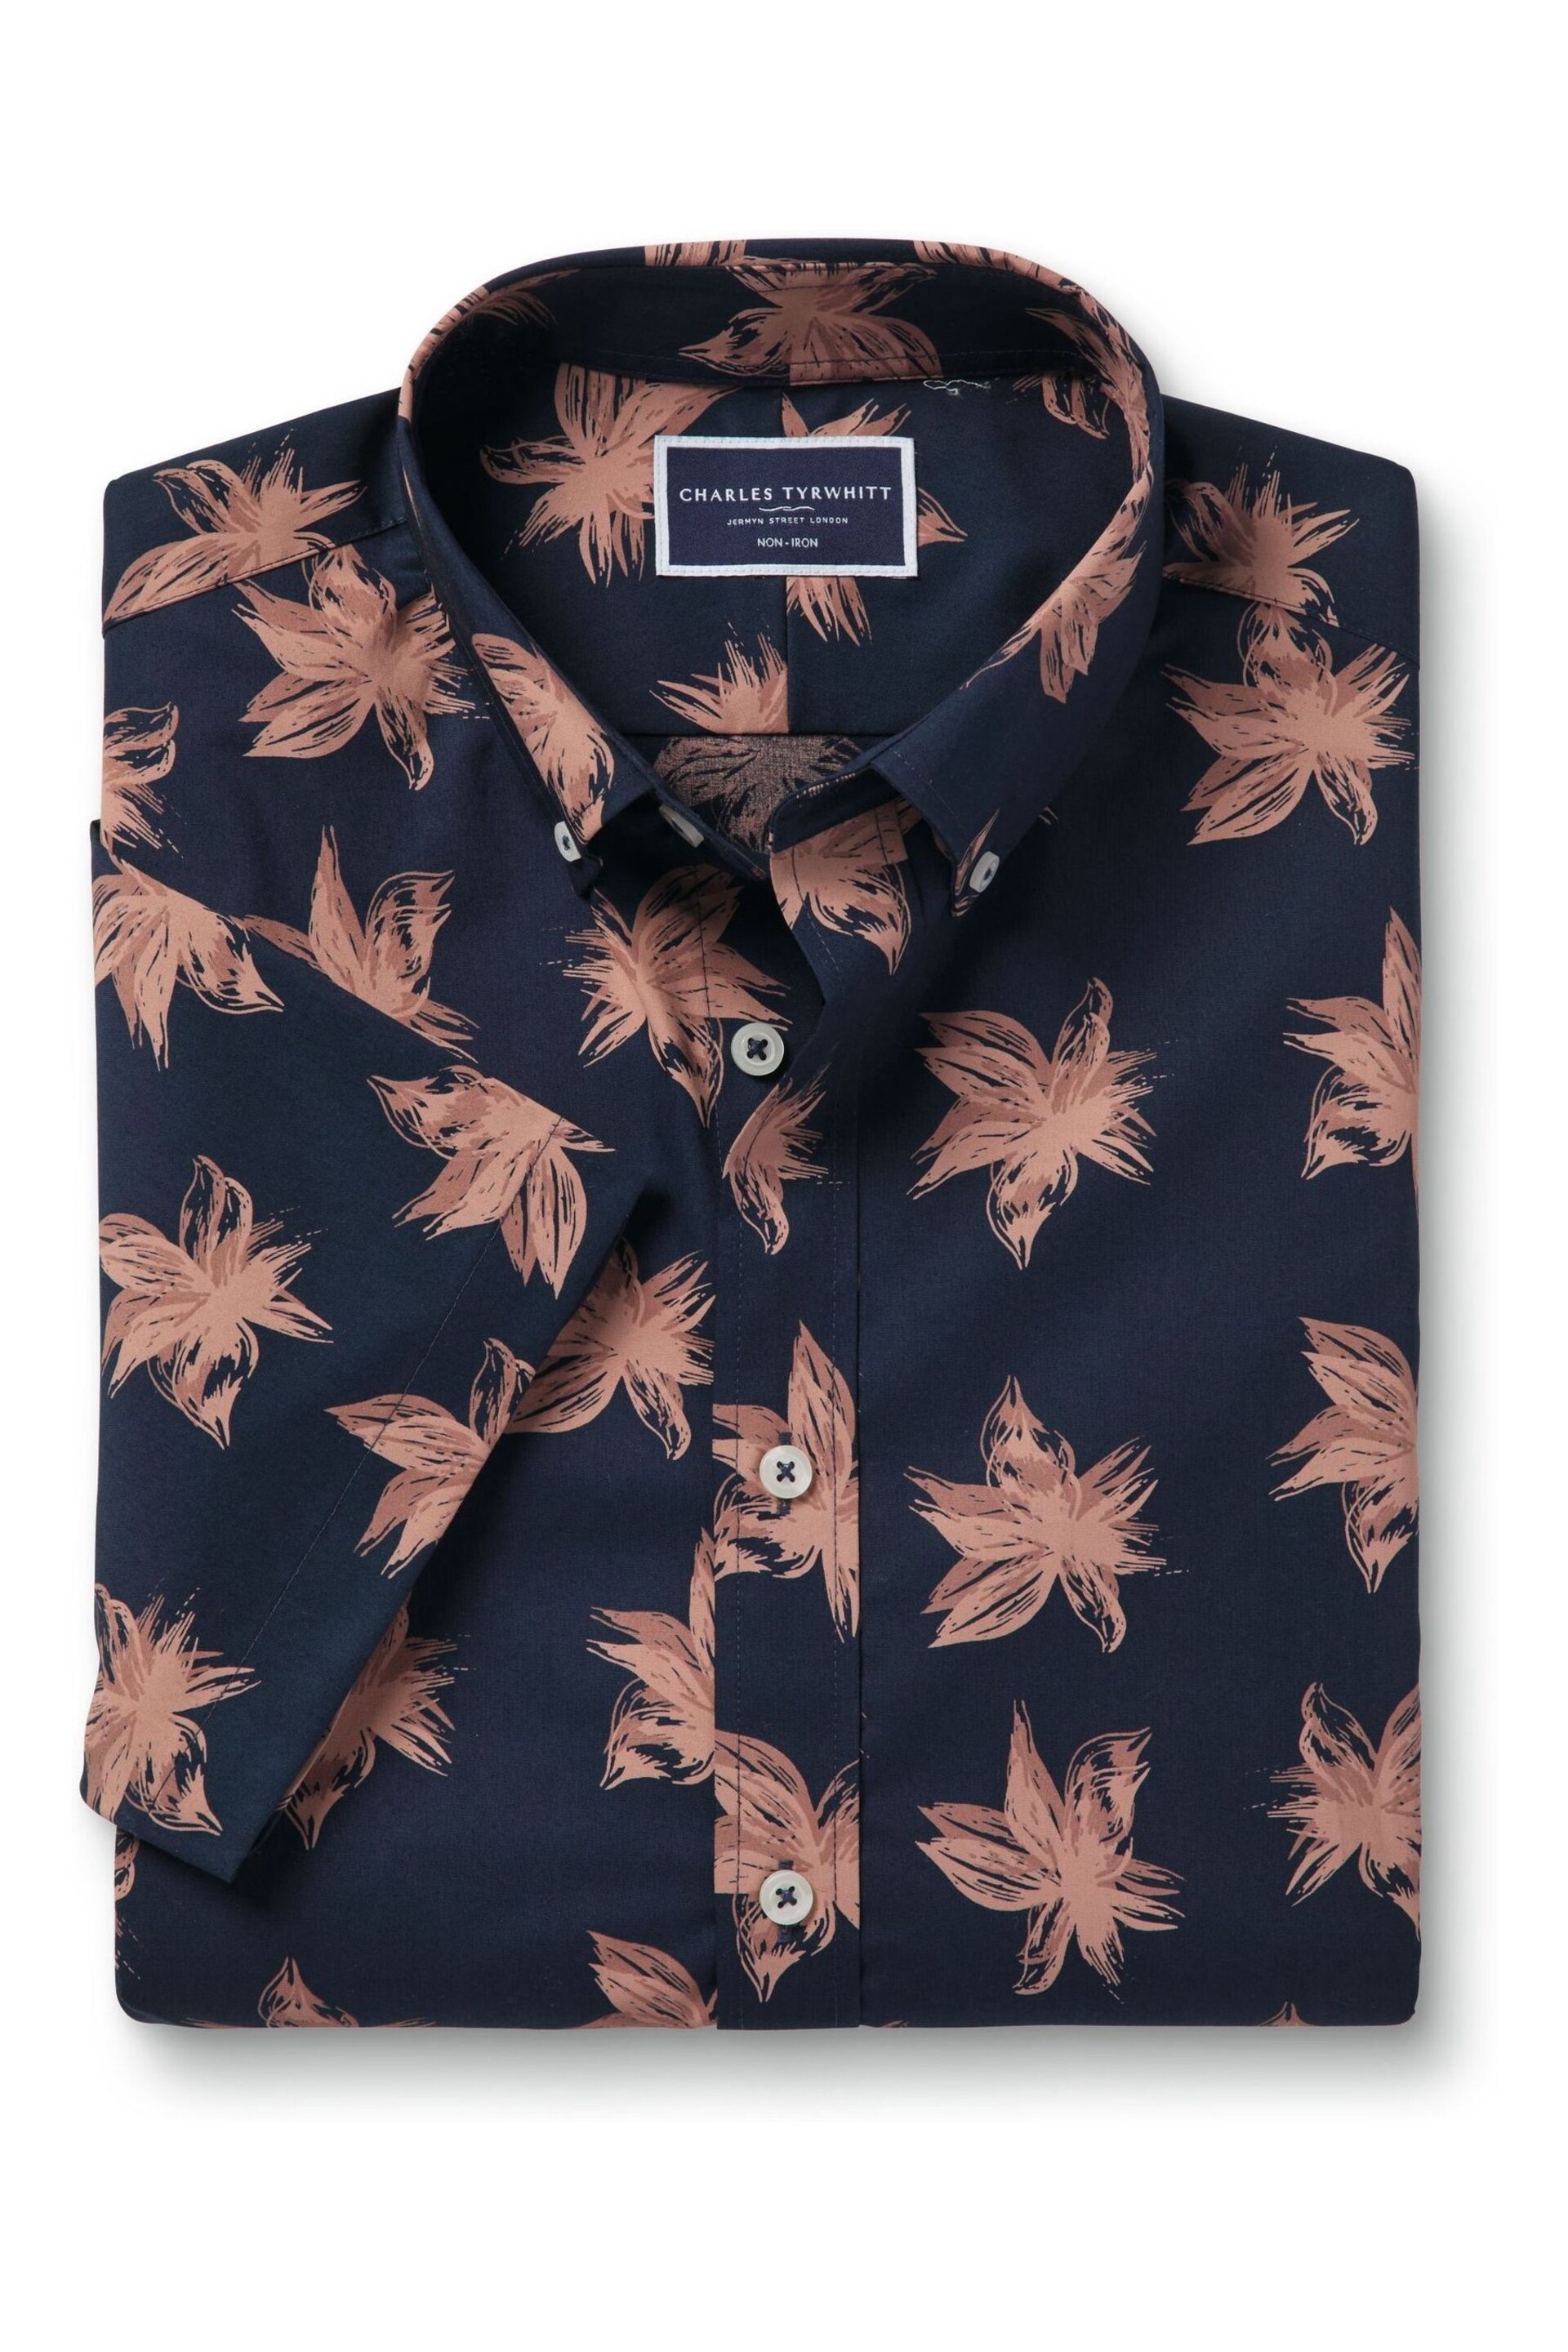 Charles Tyrwhitt Blue Large Classic Fit Non Iron Short Sleeve Floral Print Shirt - Image 3 of 5